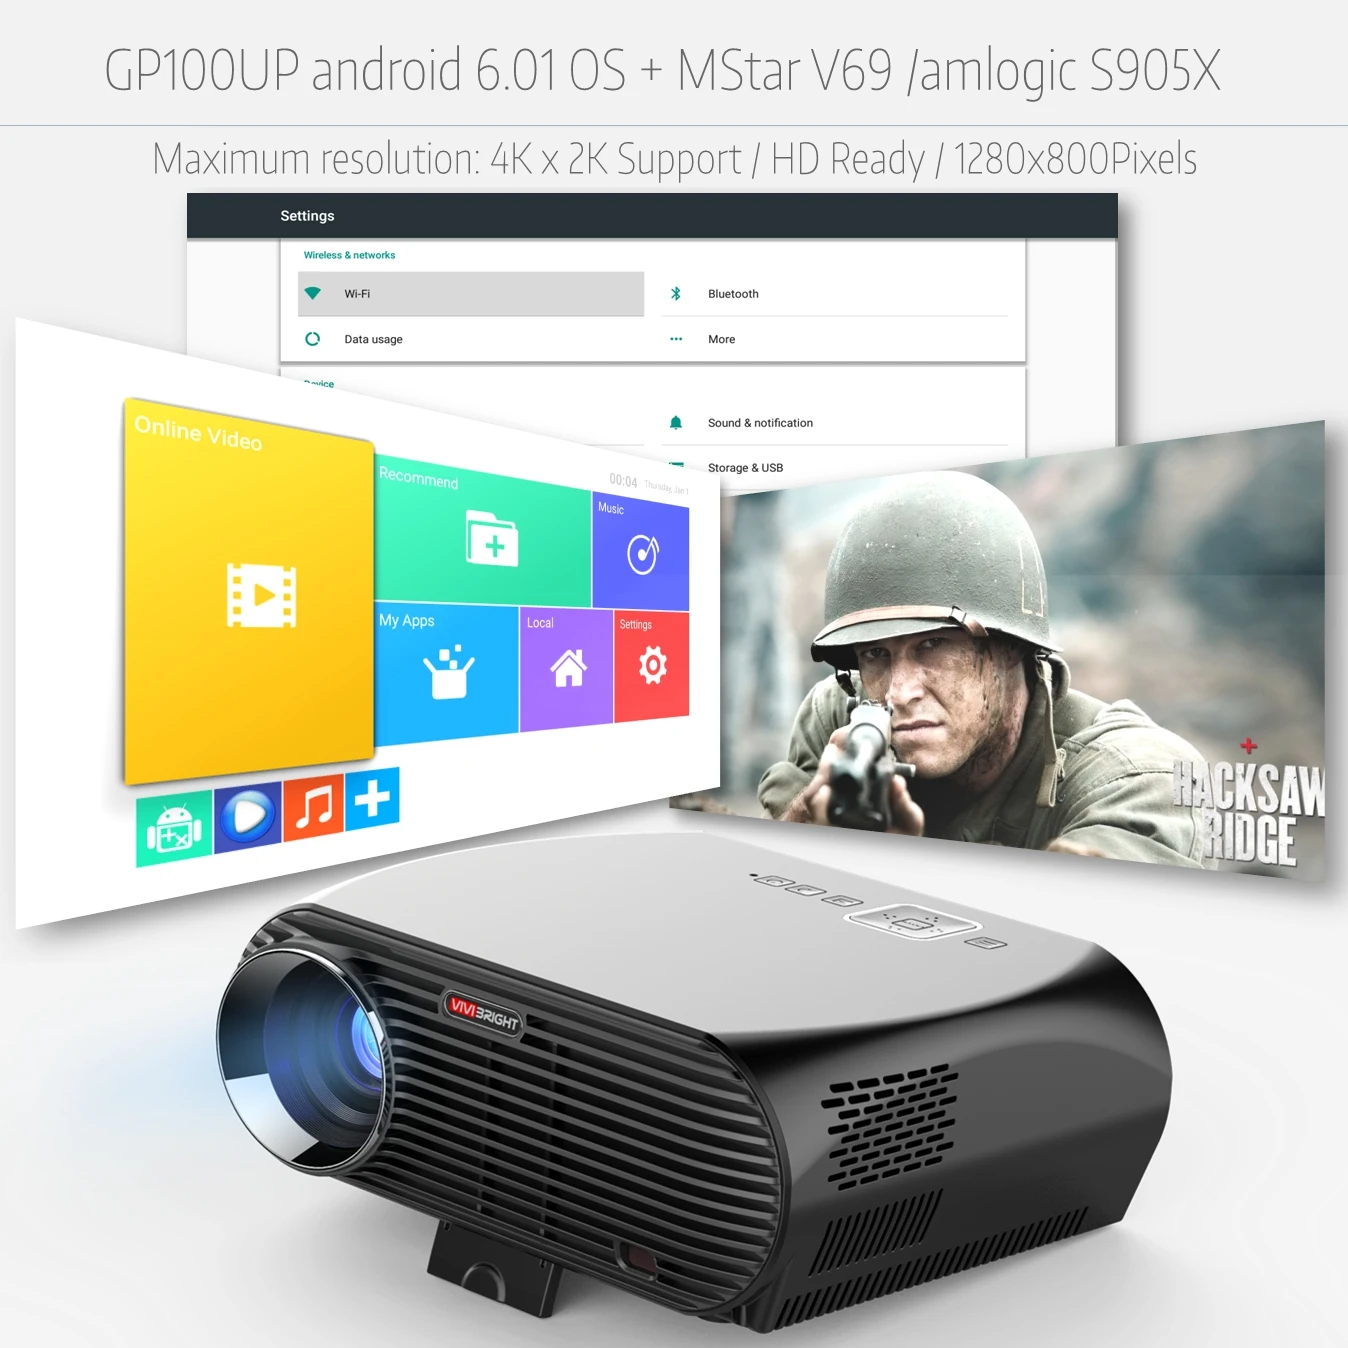 

TOP No.1 Wireless smart android WIFI Led Projector NETFLIX movie projector GP100UP VIVIBRIGHT 3d cinema 1080p hd av video, N/a